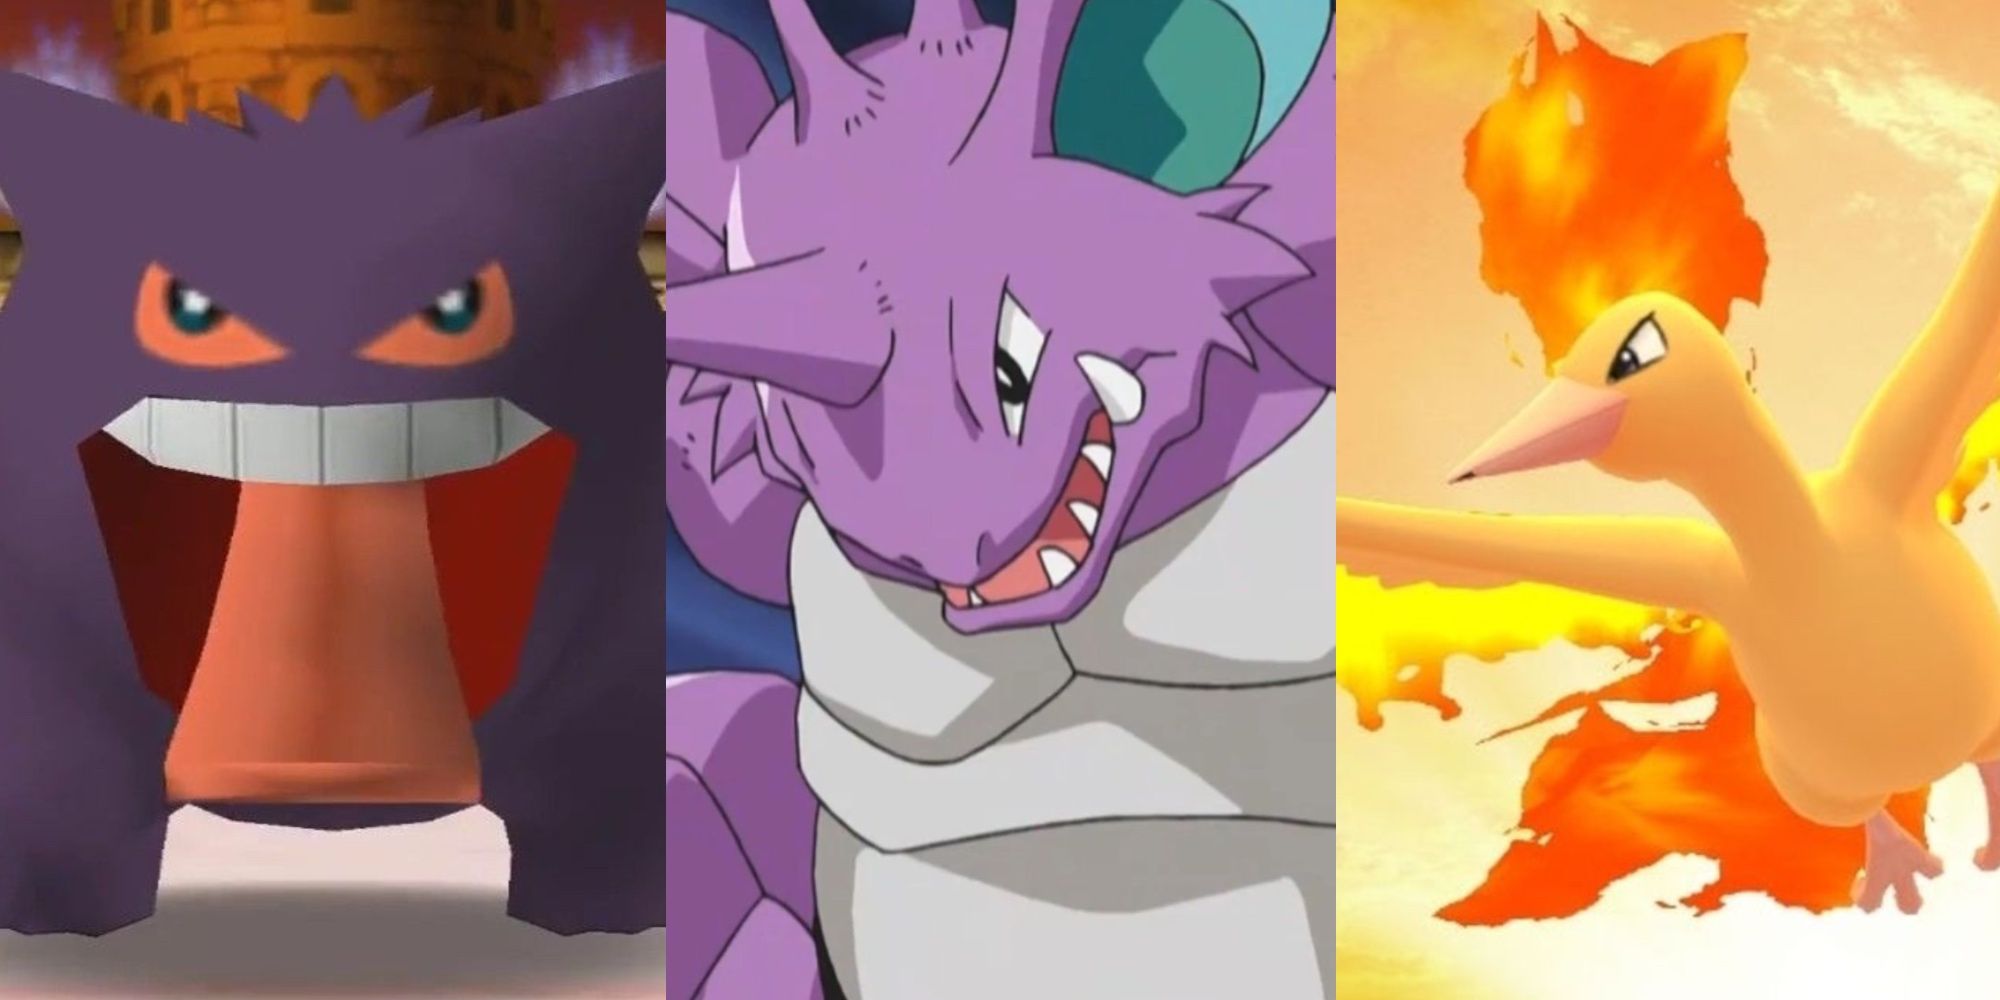 Collage image of Gengar sticking its tongue out, Nidoking lowering its head to attack, and Moltres flying through the sunlit sky in Pokemon Stadium.